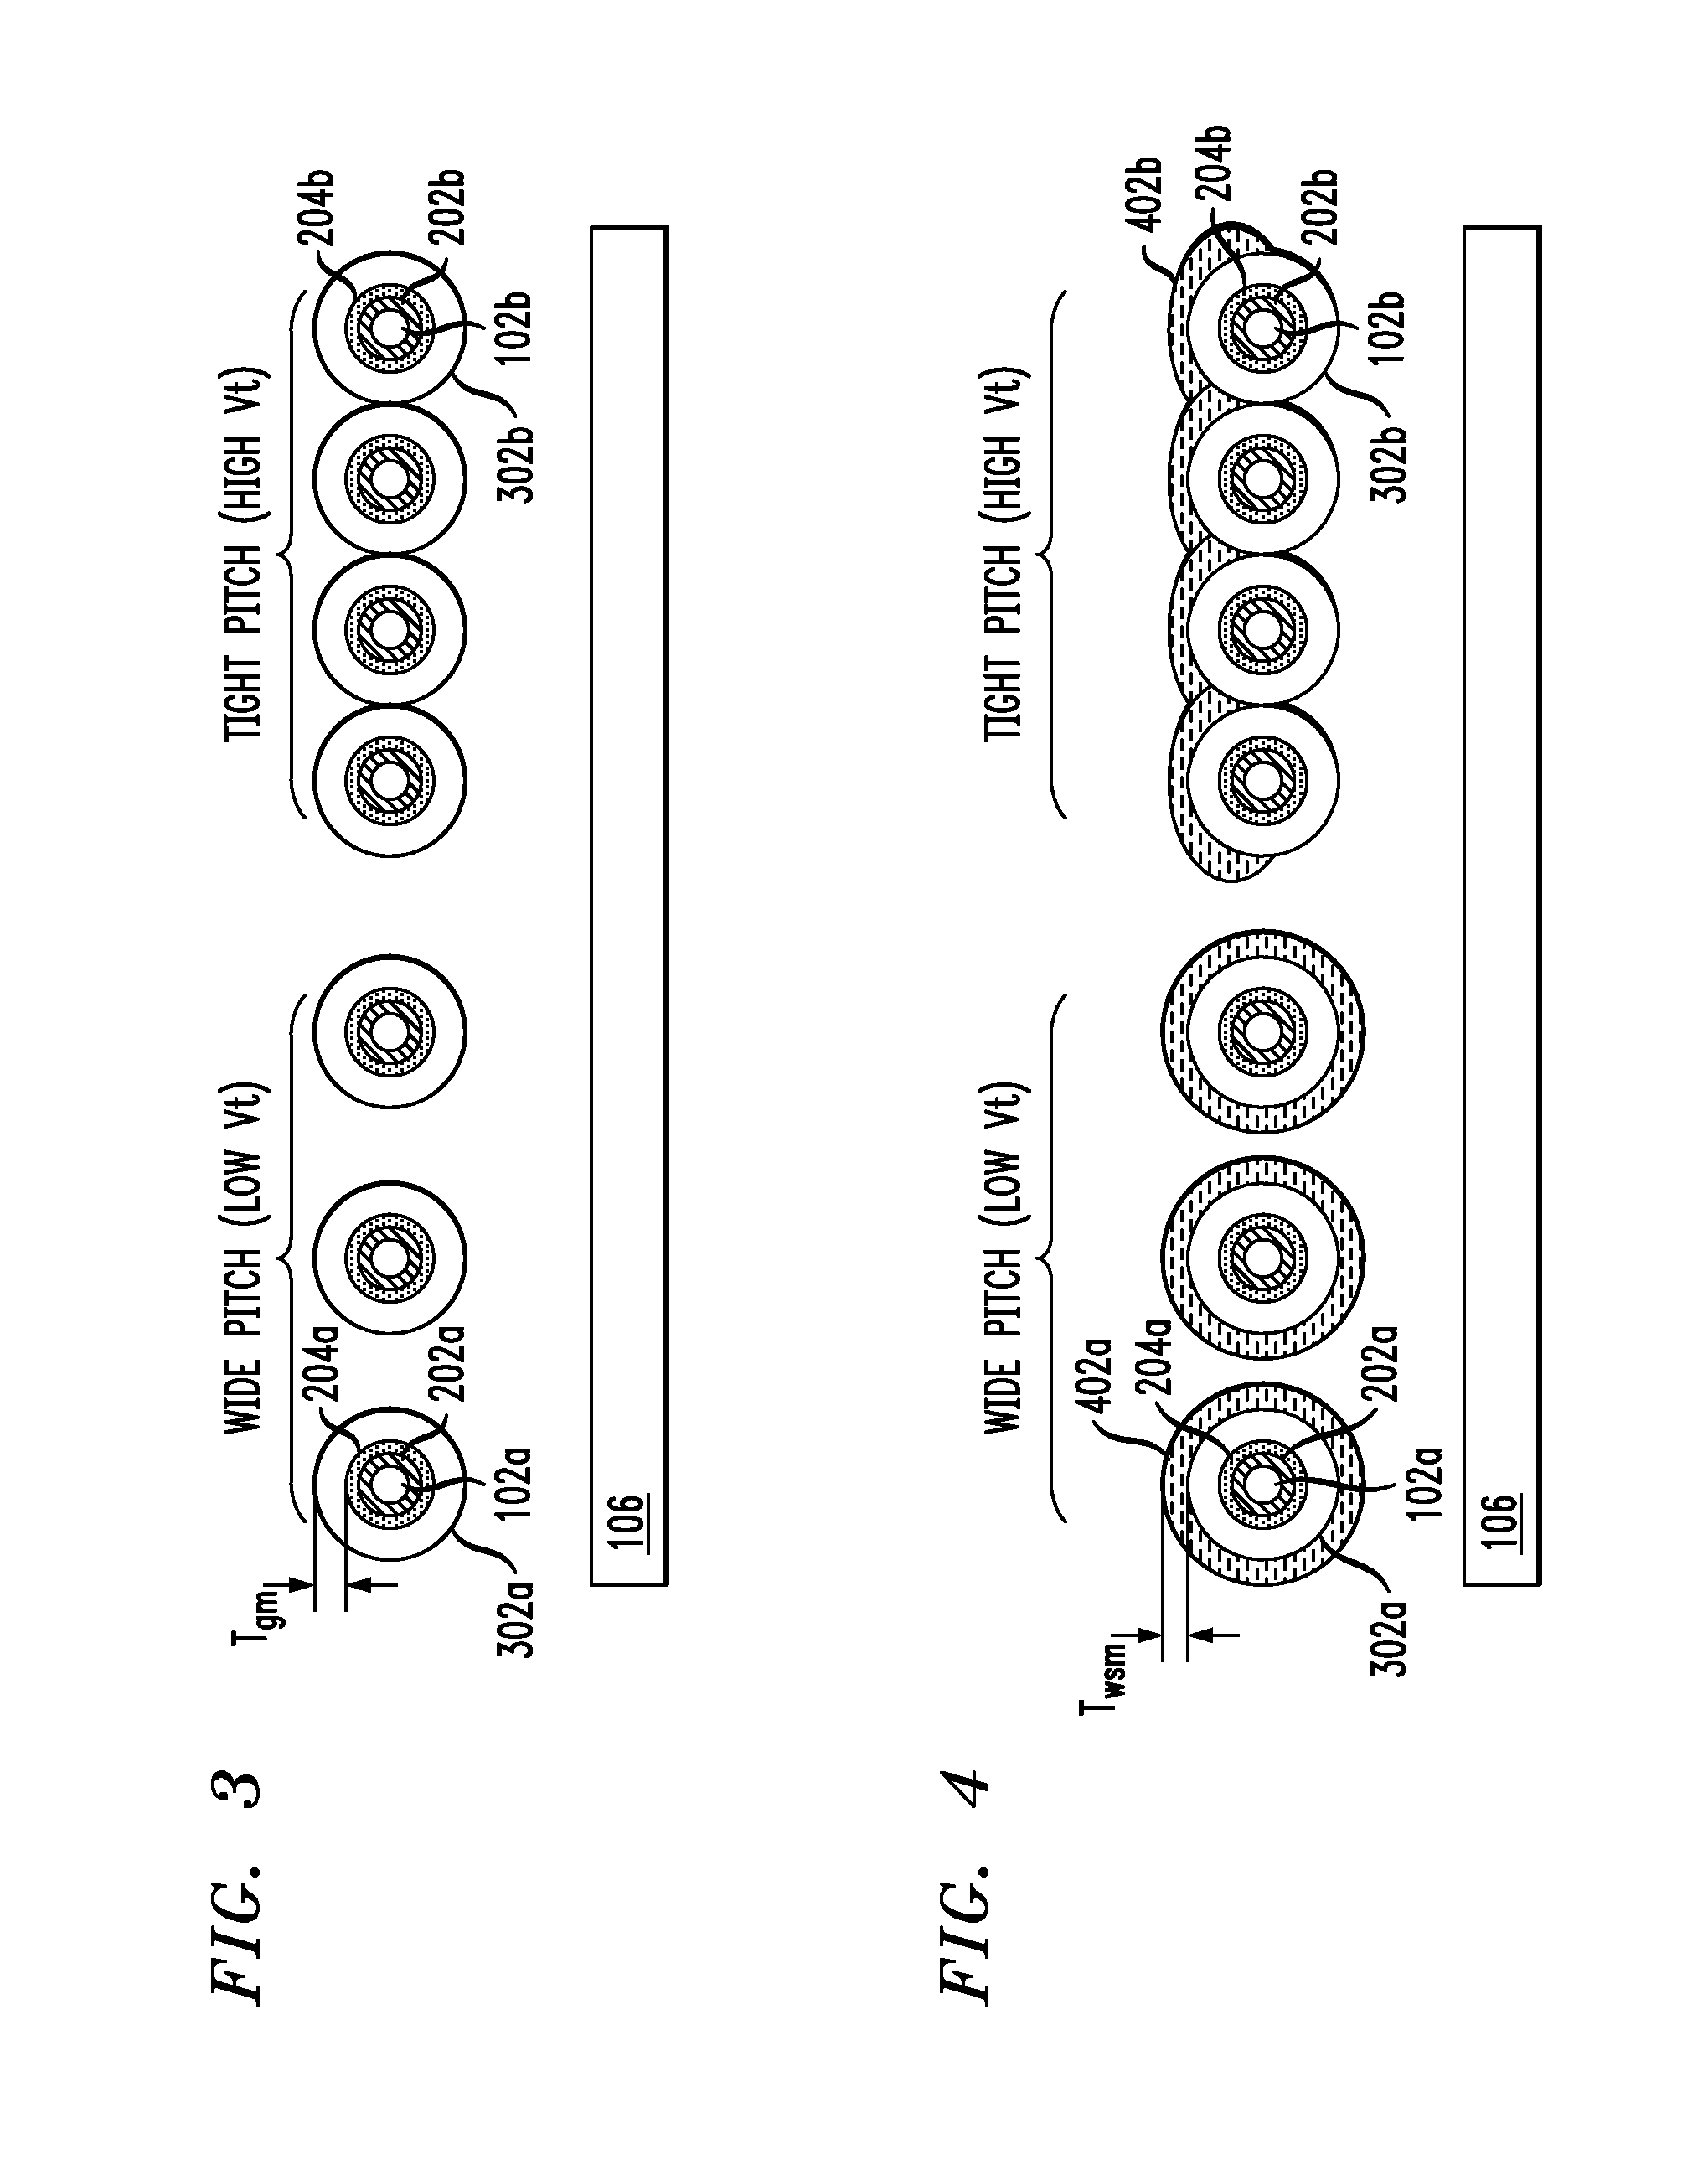 Techniques for metal gate work function engineering to enable multiple threshold voltage nanowire FET devices